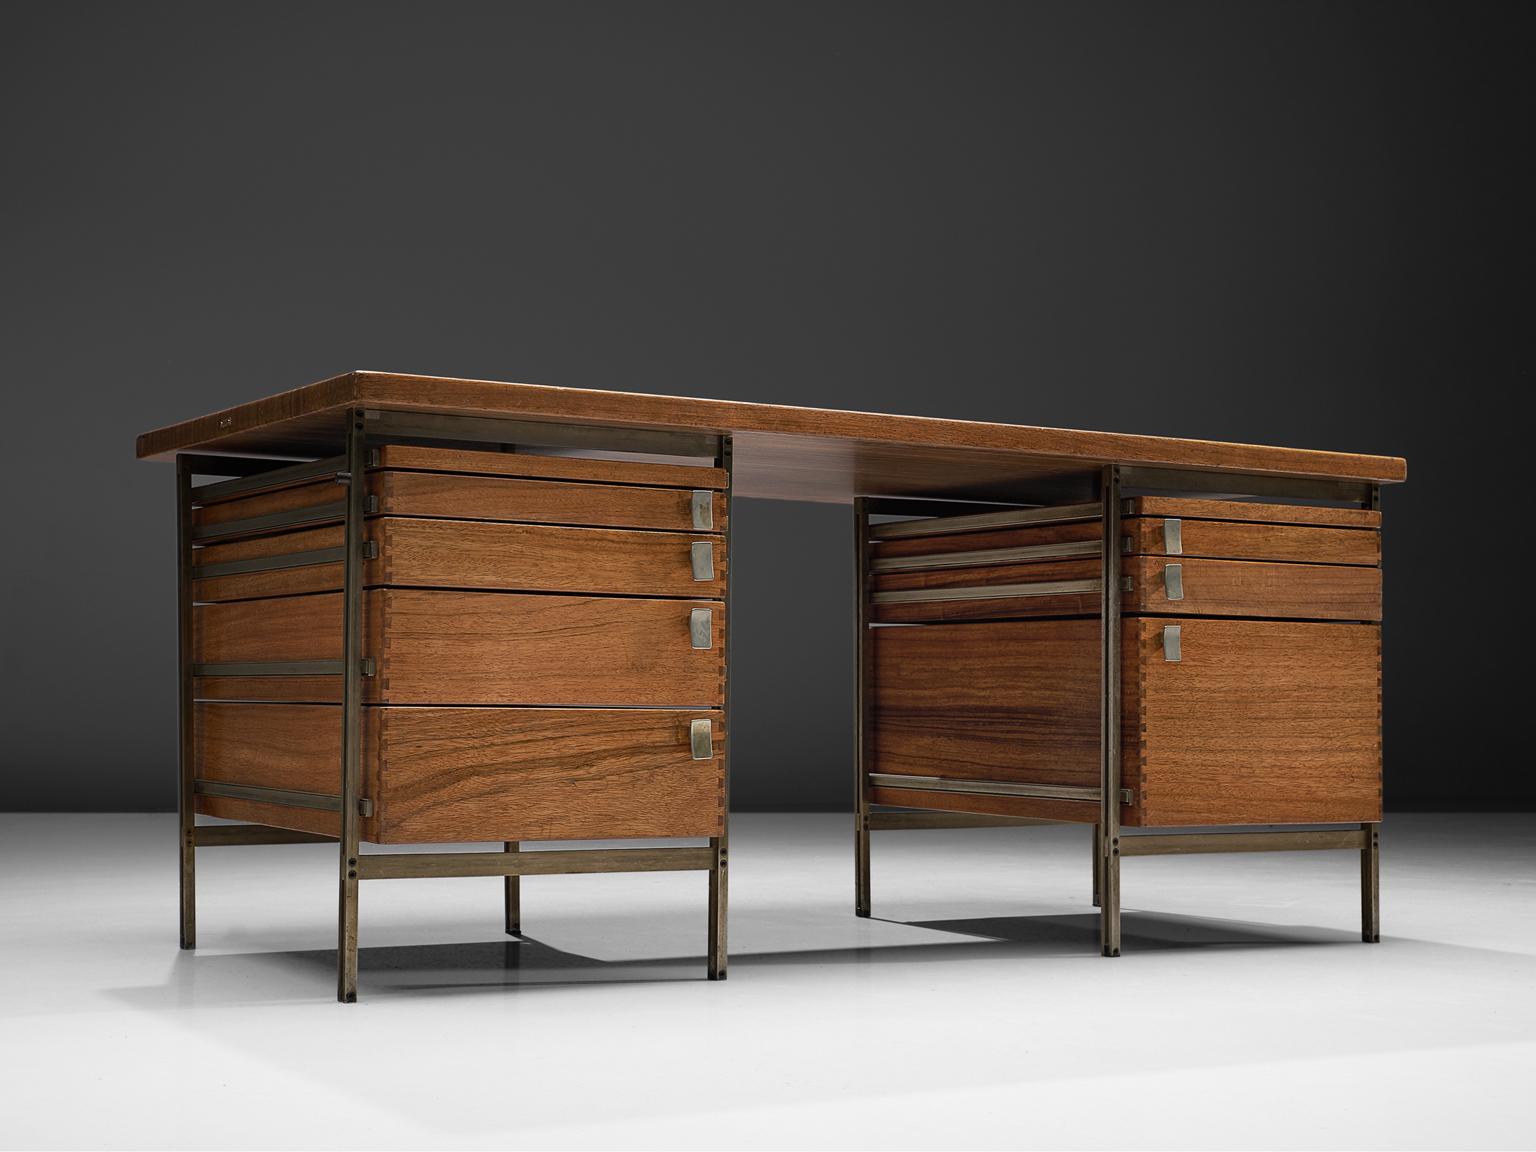 Jules Wabbes, writing desk from the Foncolin building with drawers, mutenyé and nickel-plated metal, Belgium, 1957.

Beautiful designed desk by one of Belgium's most renowned designers Jules Wabbes. This piece is made for the Foncolin building, one